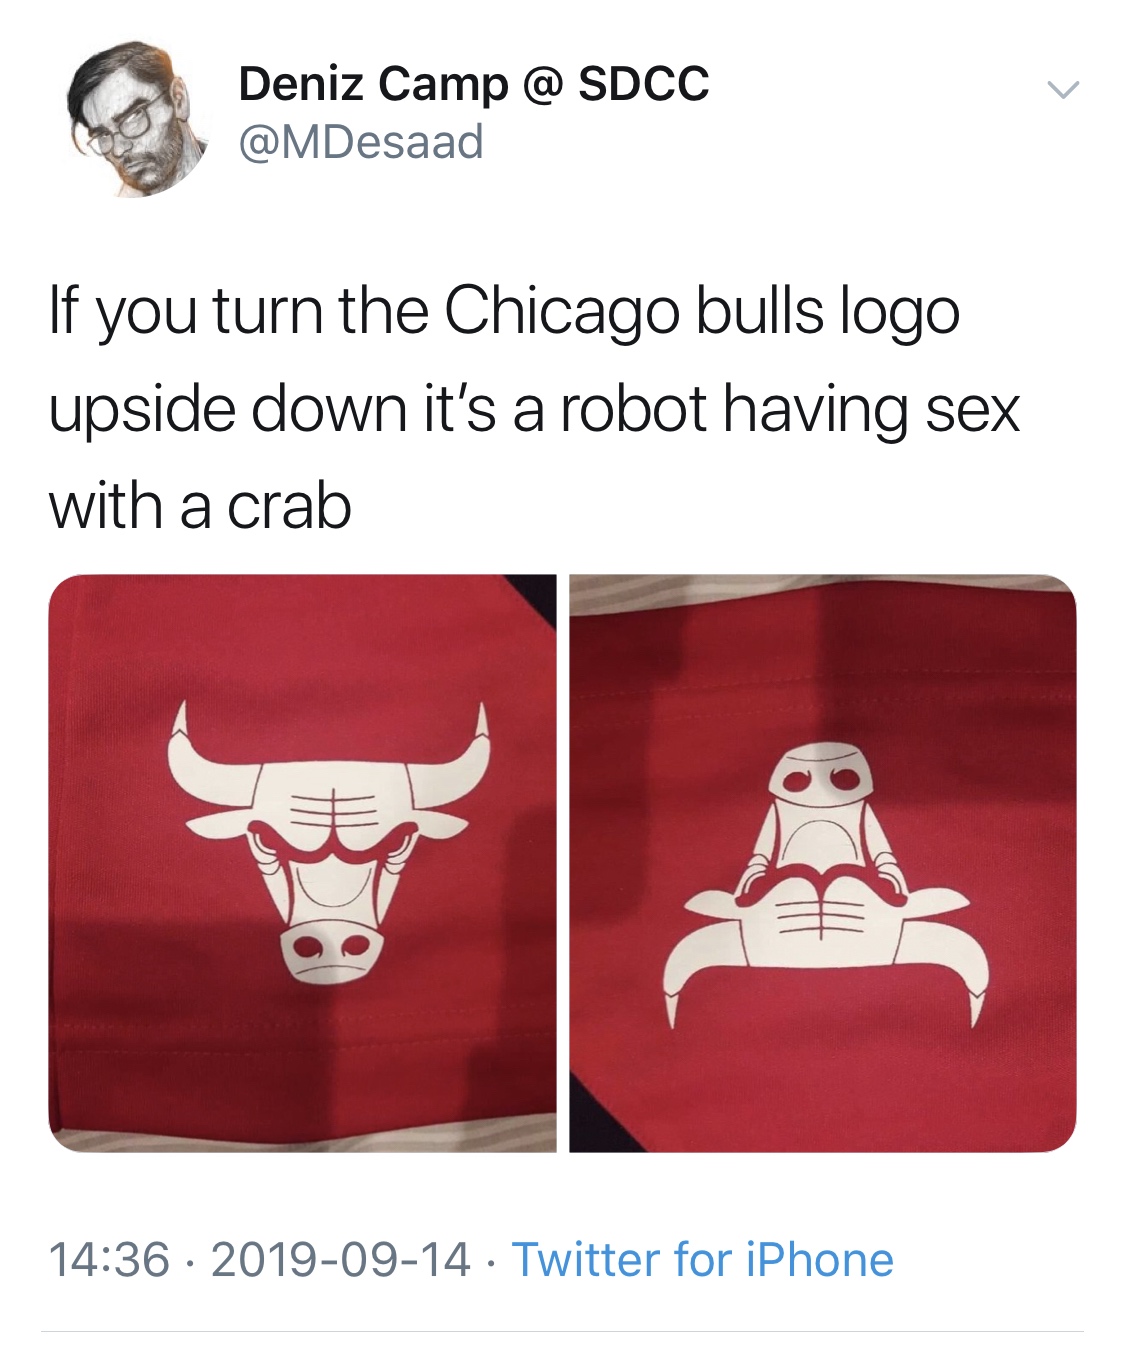 material - Deniz Camp @ Sdcc If you turn the Chicago bulls logo upside down it's a robot having sex with a crab